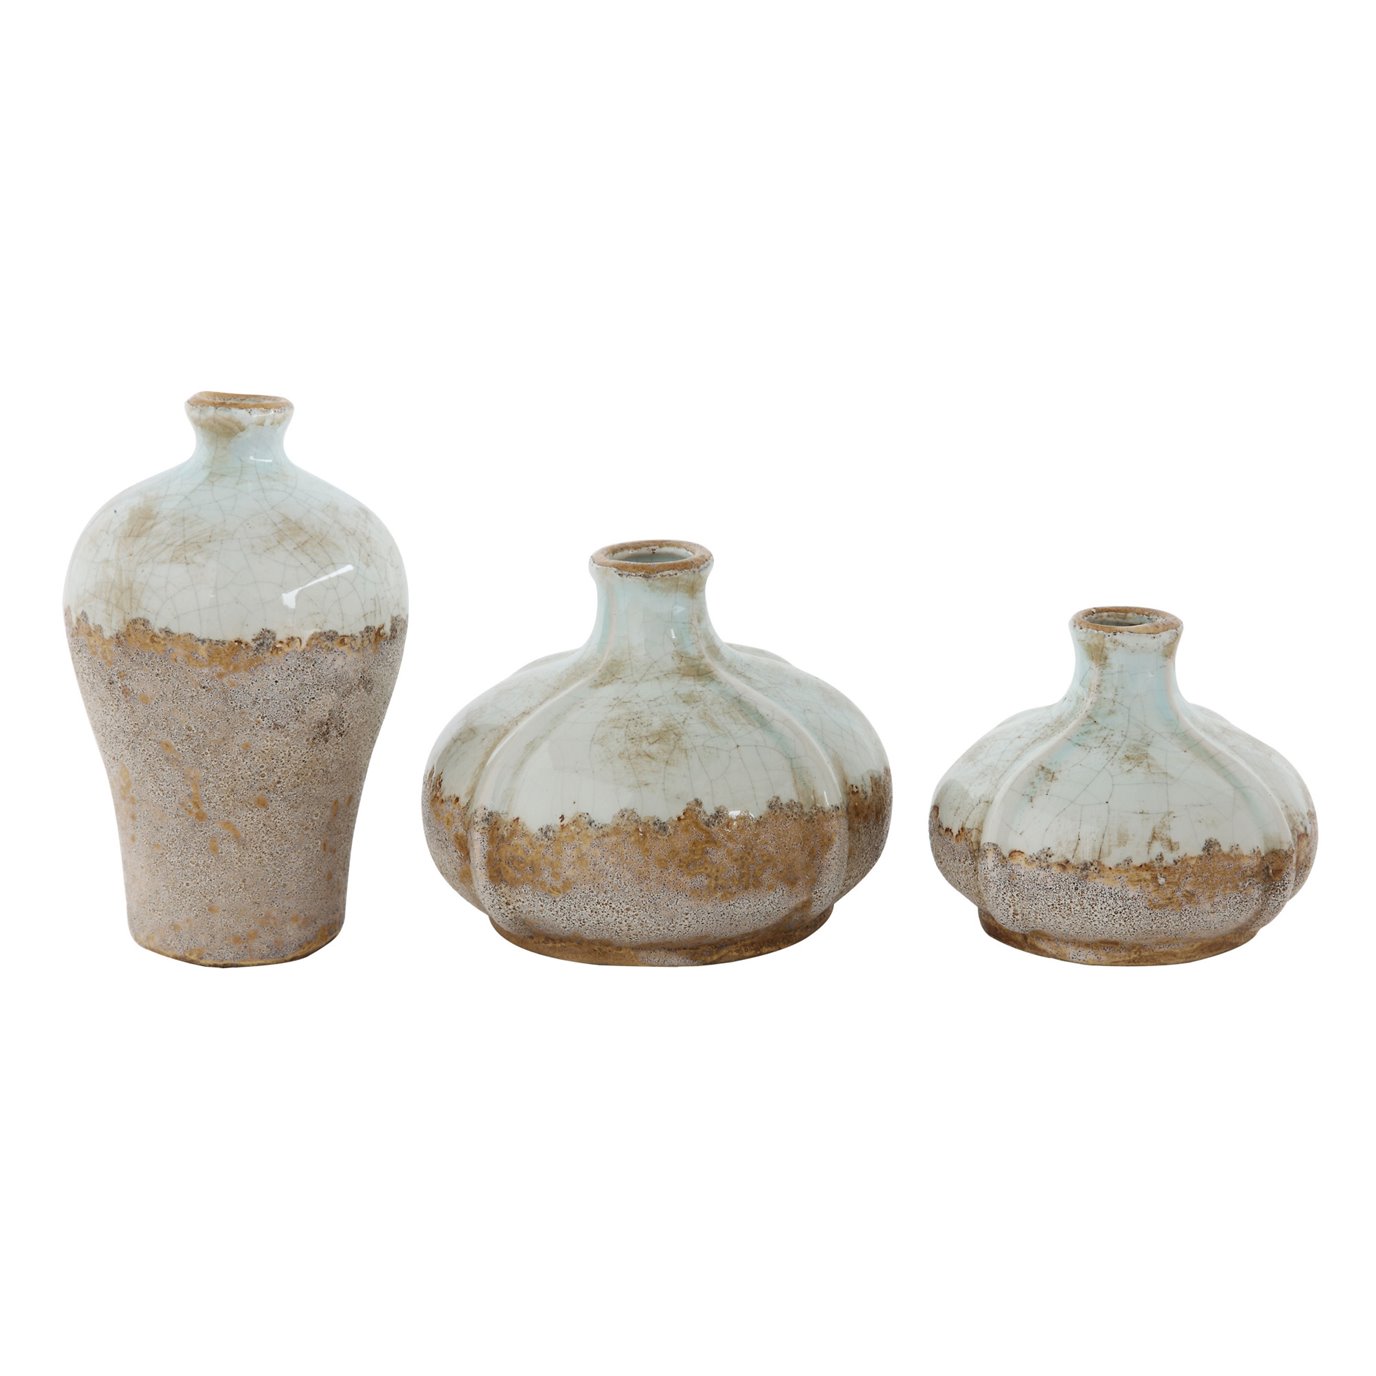 Brown & White Terracotta Vases with Distressed Finish (Set of 3 Sizes)